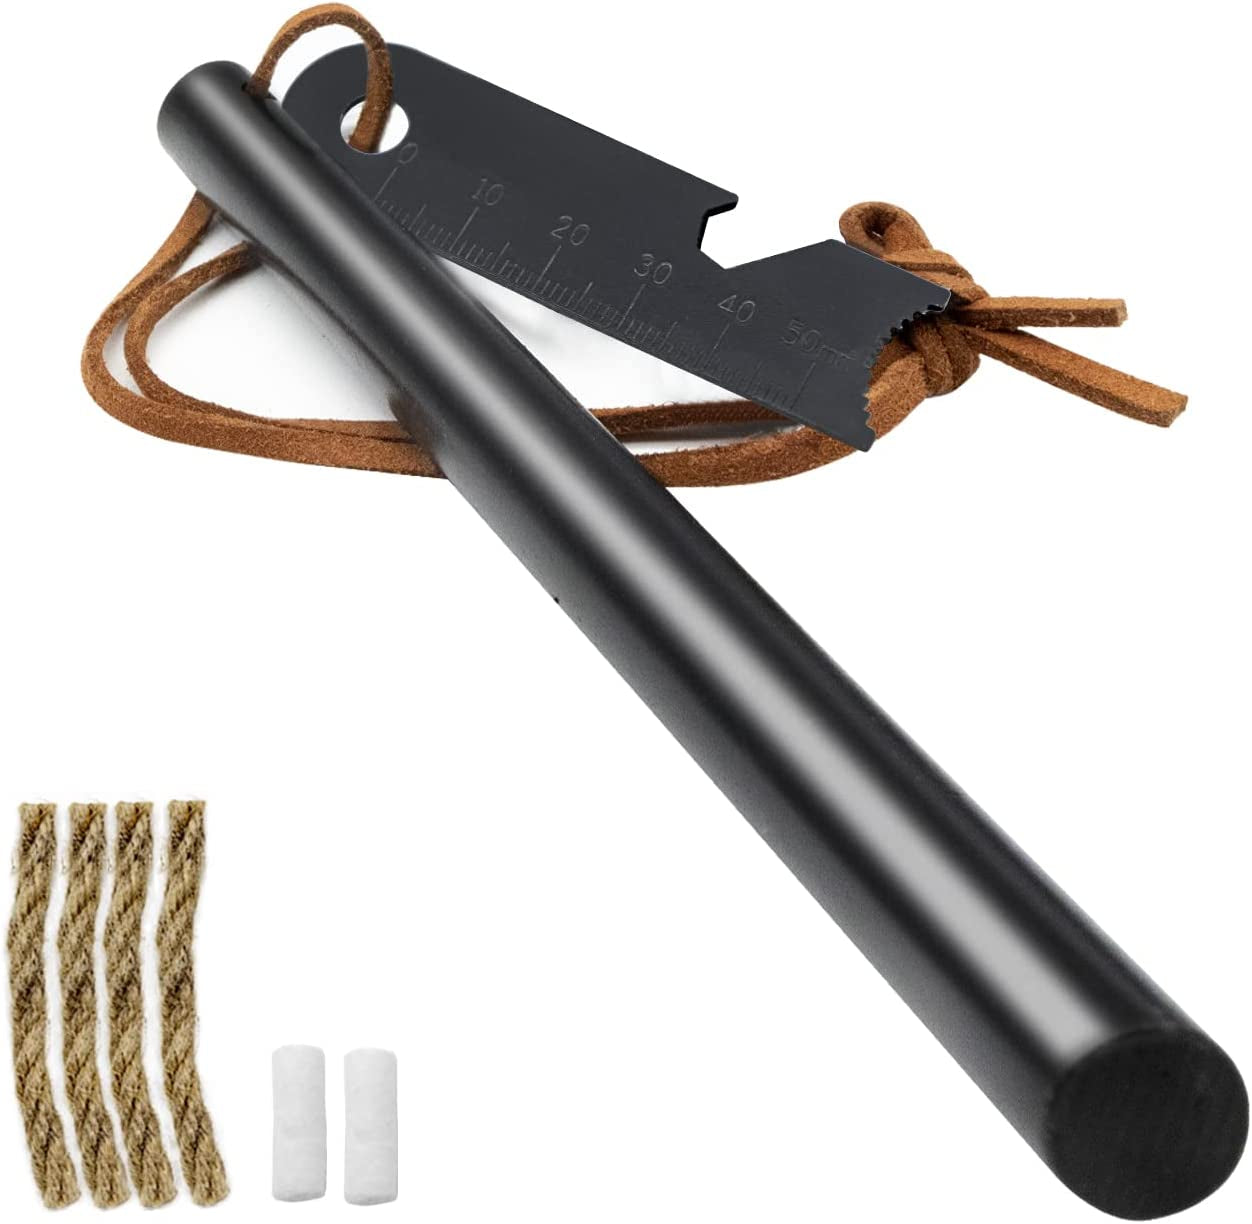 BCHARYA Fire Starter Survival Tool, Ferro Rod Kit with Leather Neck Lanyard and Multi-Tool Striker, Flint and Steel Survival Igniter with Tinder Rope and Tab for Camping, Hiking and Emergency